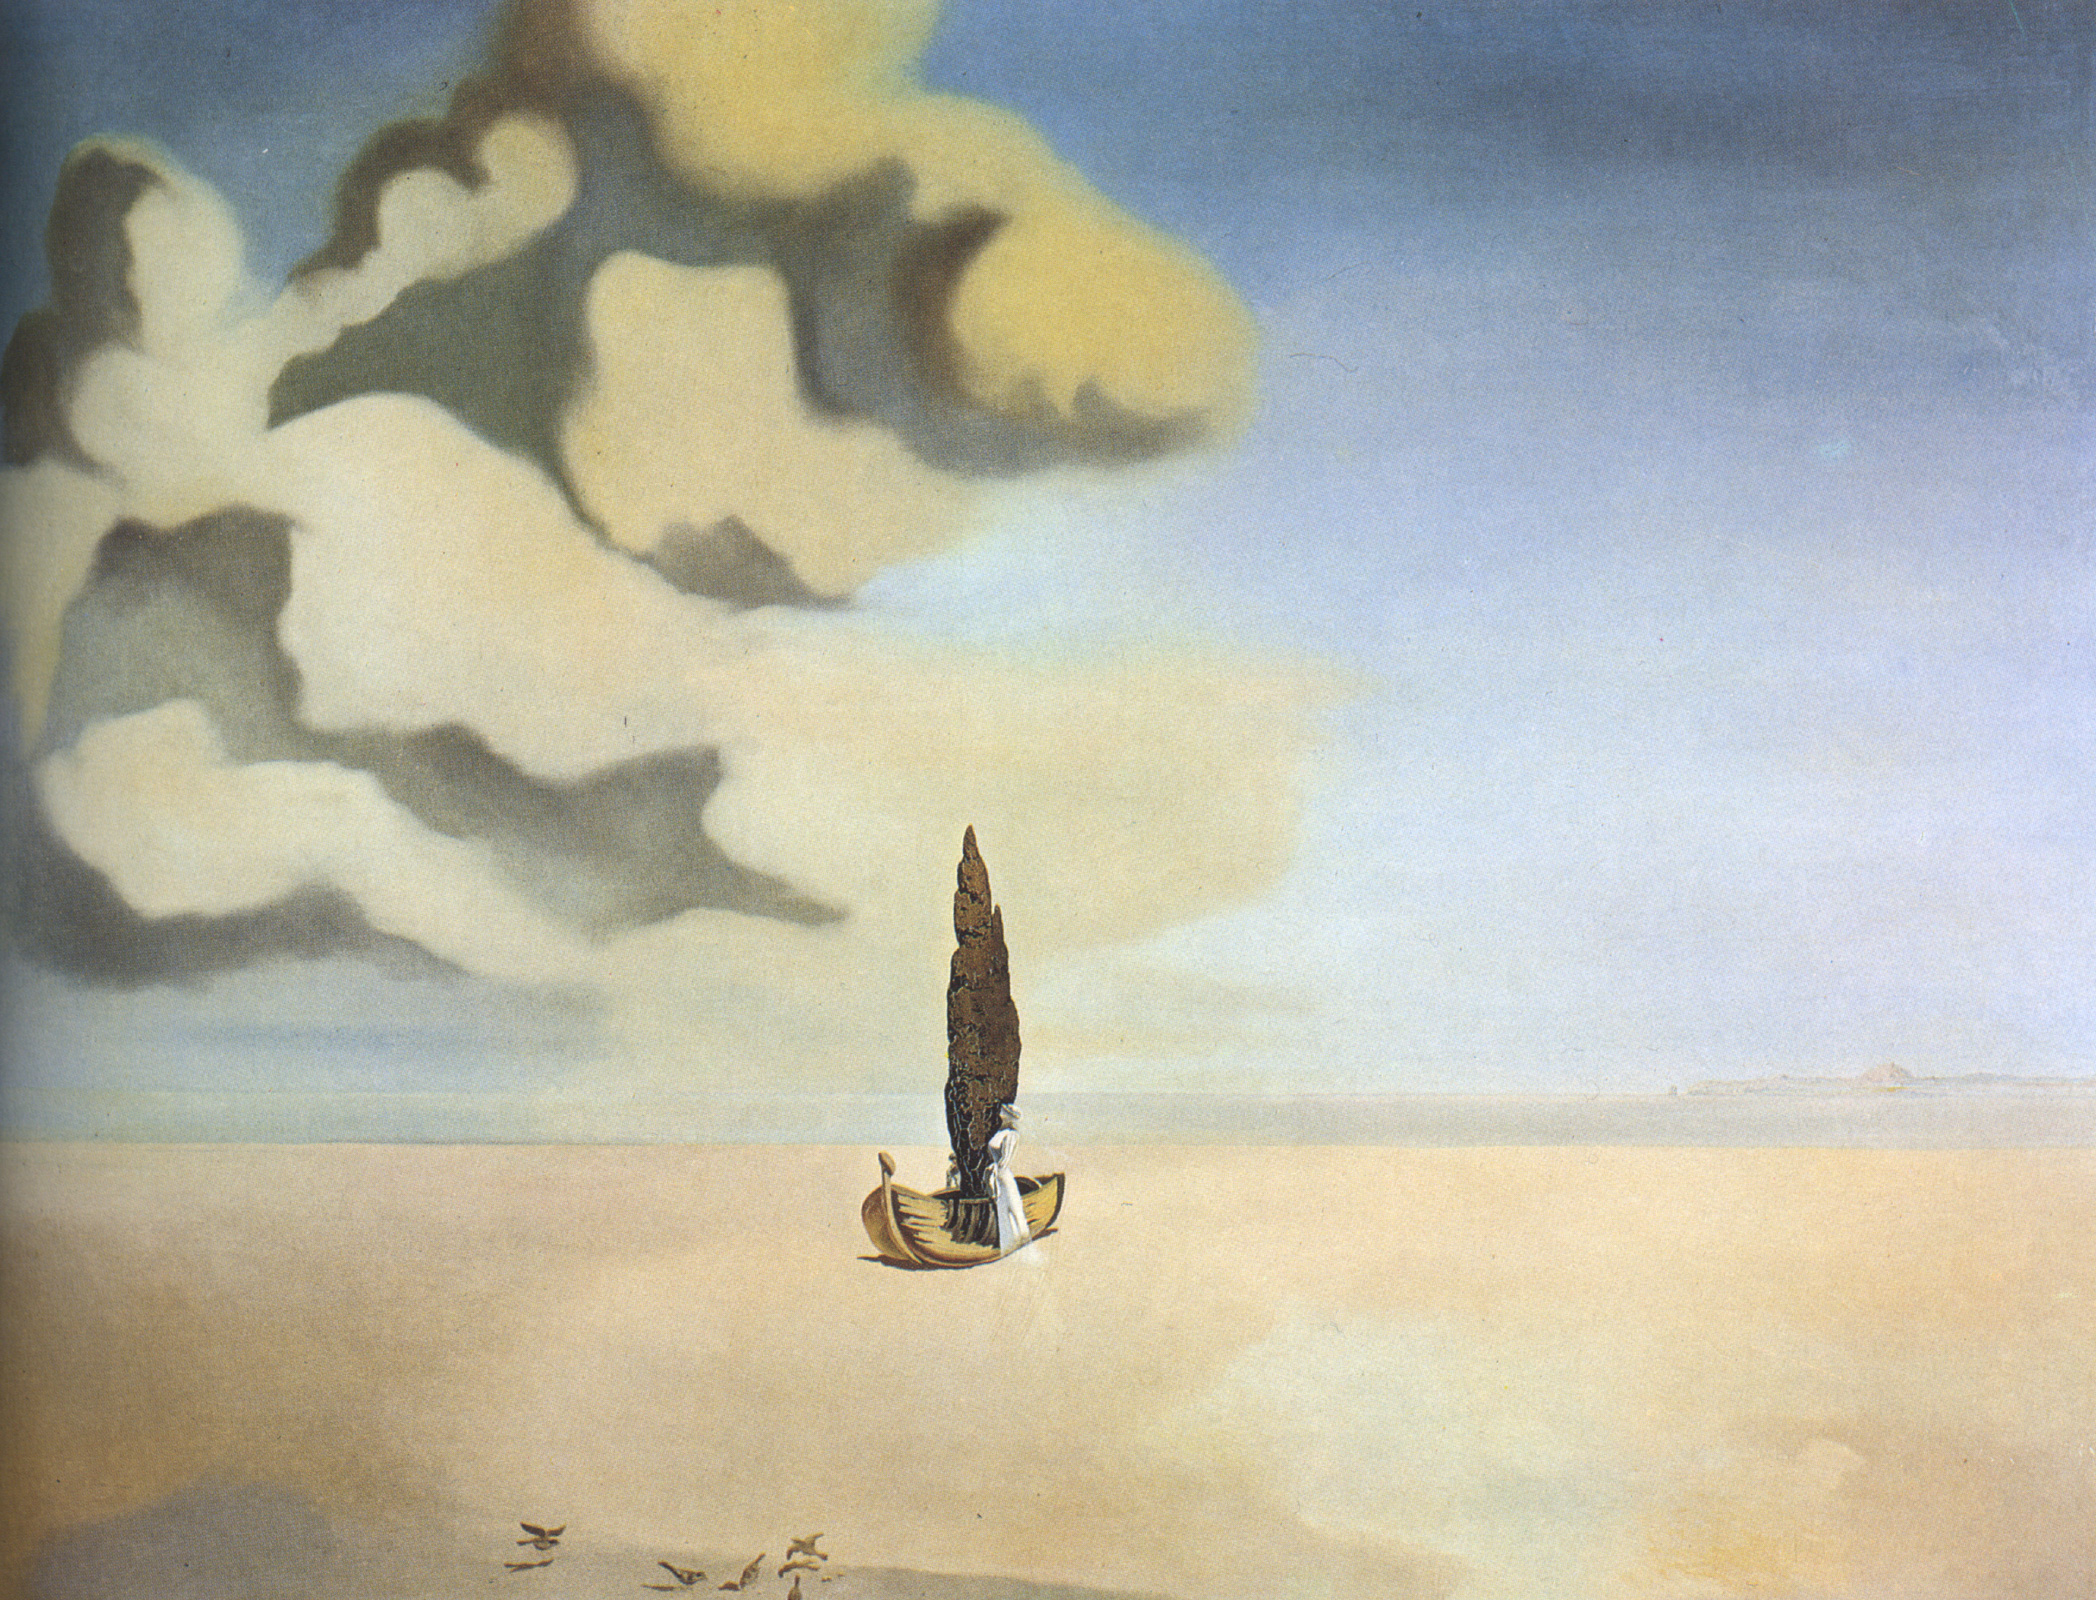 Figure and Drapery in a Landscape, c.1934 - Salvador Dali - WikiArt.org